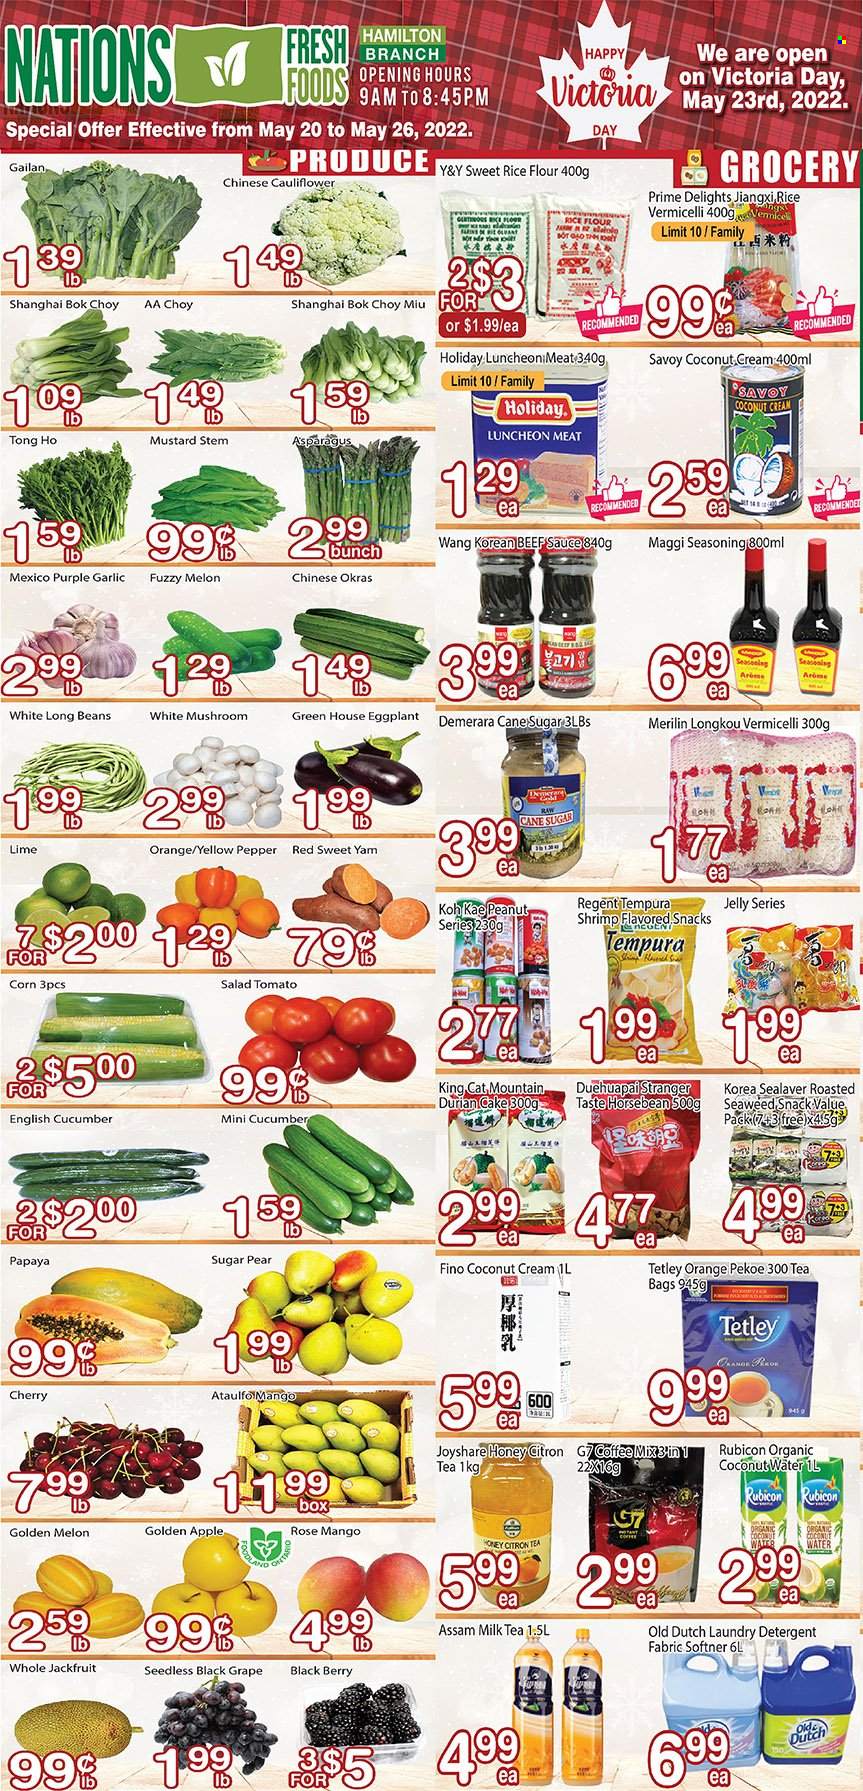 thumbnail - Nations Fresh Foods Flyer - May 20, 2022 - May 26, 2022 - Sales products - cake, bok choy, cauliflower, corn, cucumber, garlic, snack, salad, eggplant, papaya, melons, shrimps, sauce, breaded shrimps, lunch meat, jelly, milk tea, coconut cream, cane sugar, demerara sugar, flour, rice flour, sugar, seaweed, rice vermicelli, pepper, spice, mustard, honey, tea bags, coffee, detergent, laundry detergent, Maggi. Page 1.